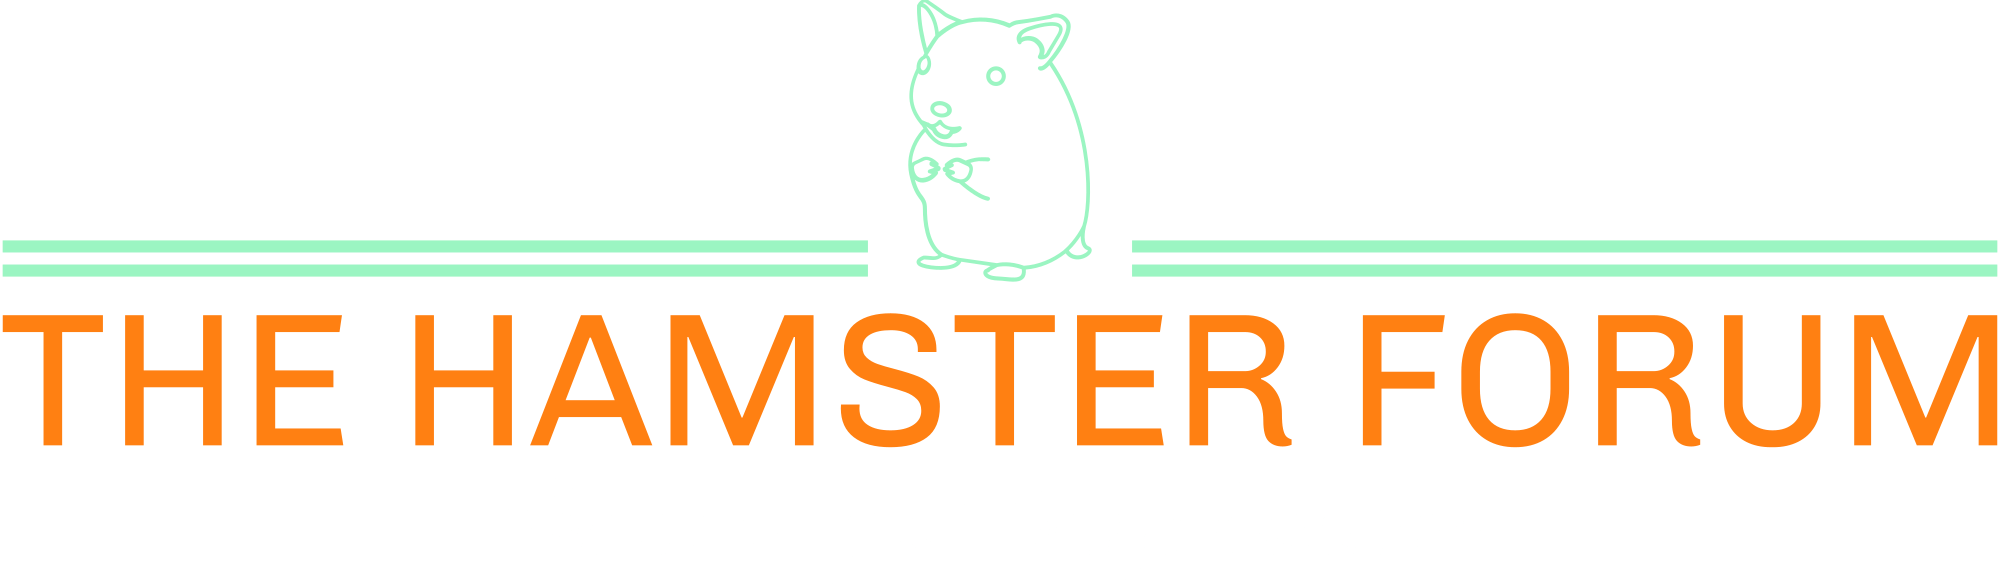 The Hamster Forum